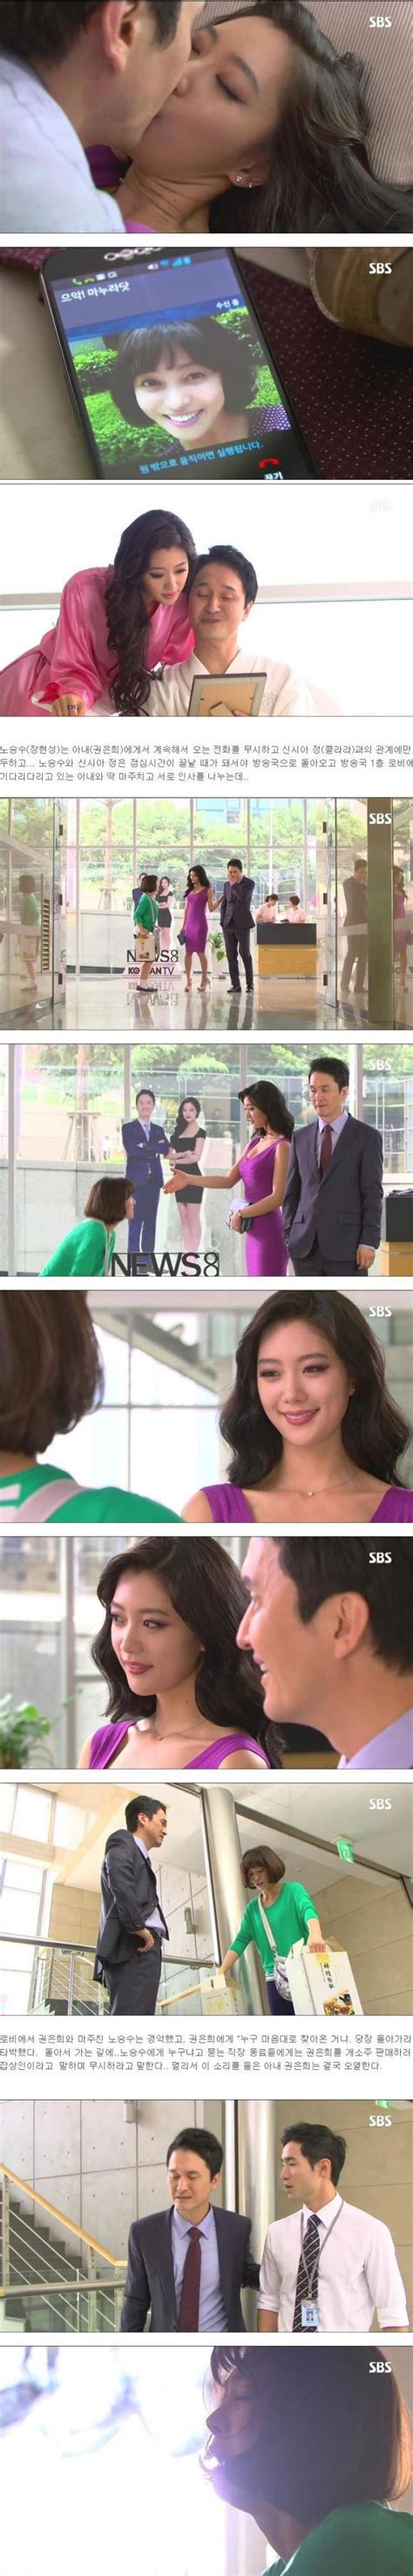 [spoiler] added episodes 3 and 4 captures for the korean drama goddess of marriage hancinema